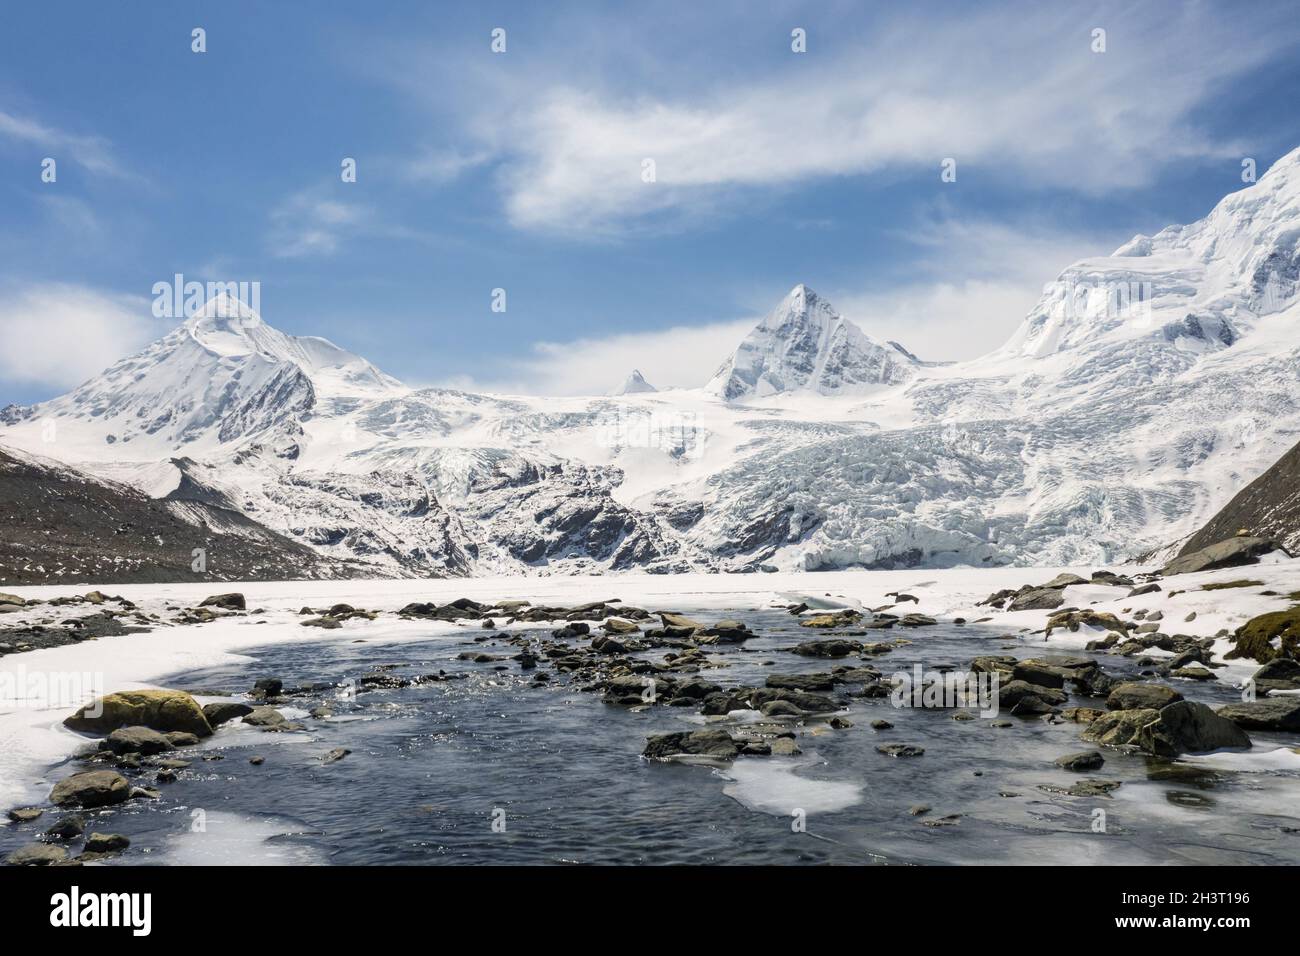 Snow mountain and glacial landscape Stock Photo